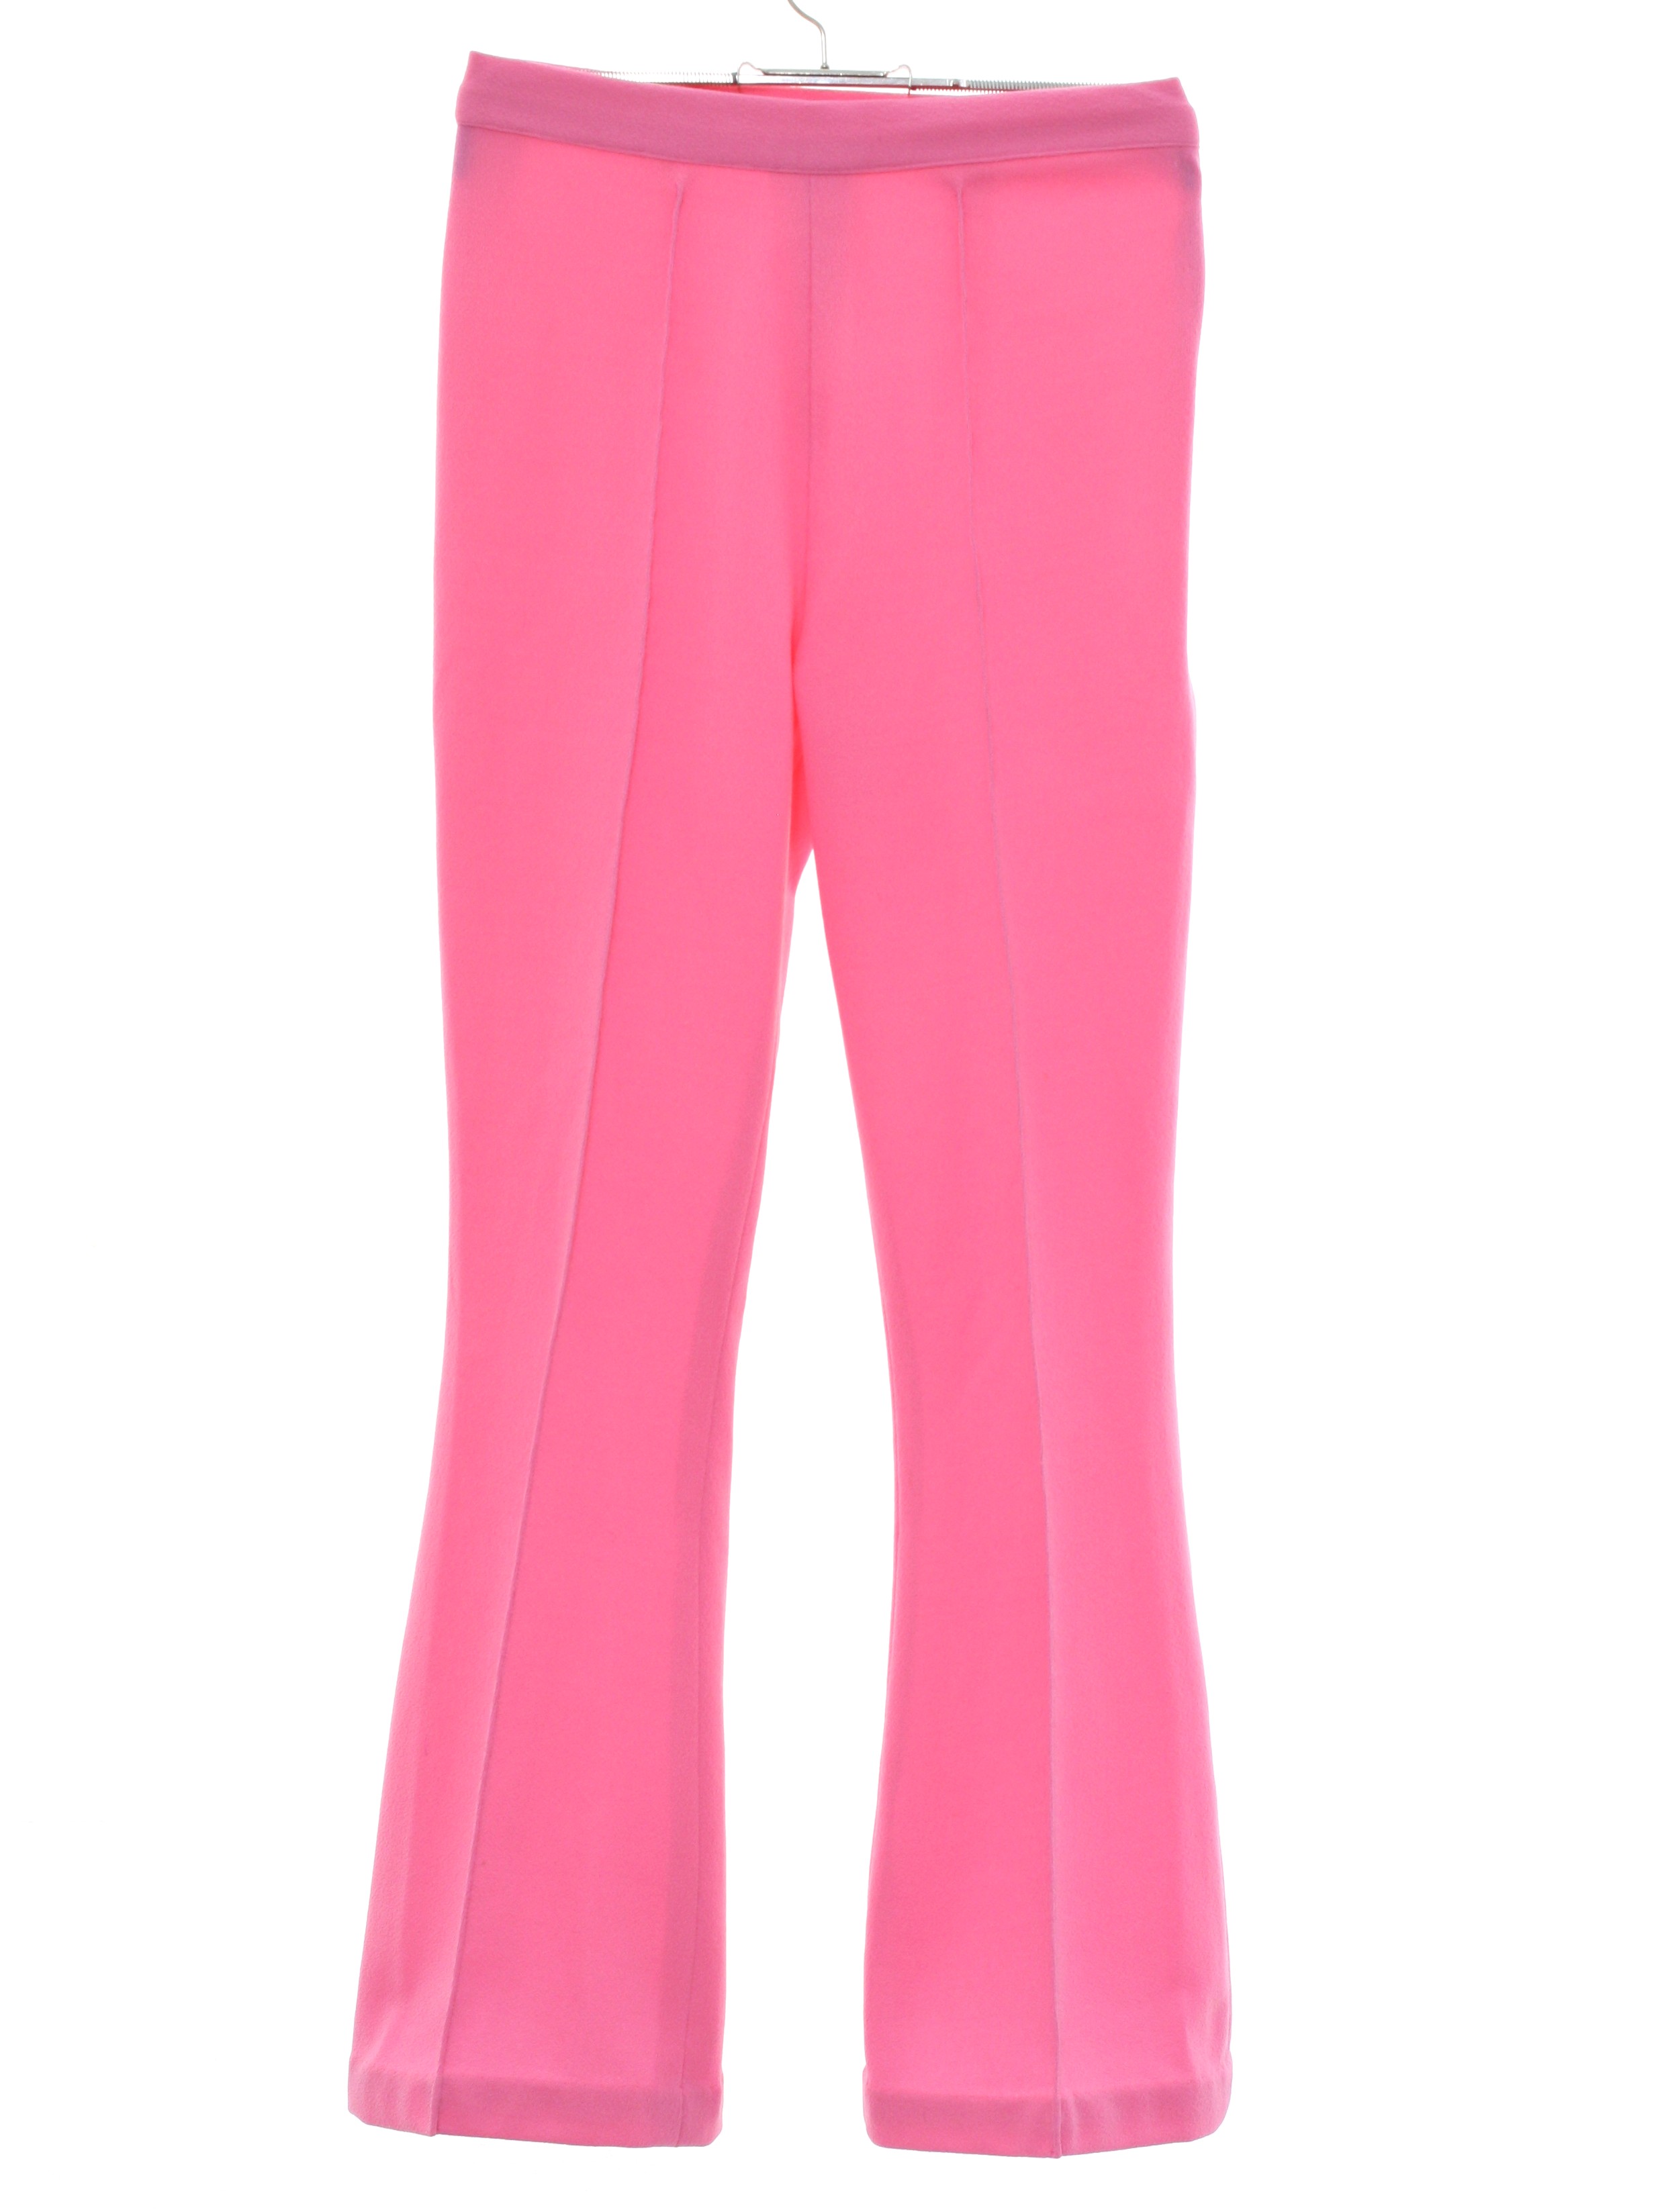 1970's Vintage Flared Pants / Flares: 70s -No Label- Womens bubblegum pink  solid colored polyester doubleknit pleated front knit flared pants with  cuffless hem, no front pockets, no rear pockets, elastic waistline